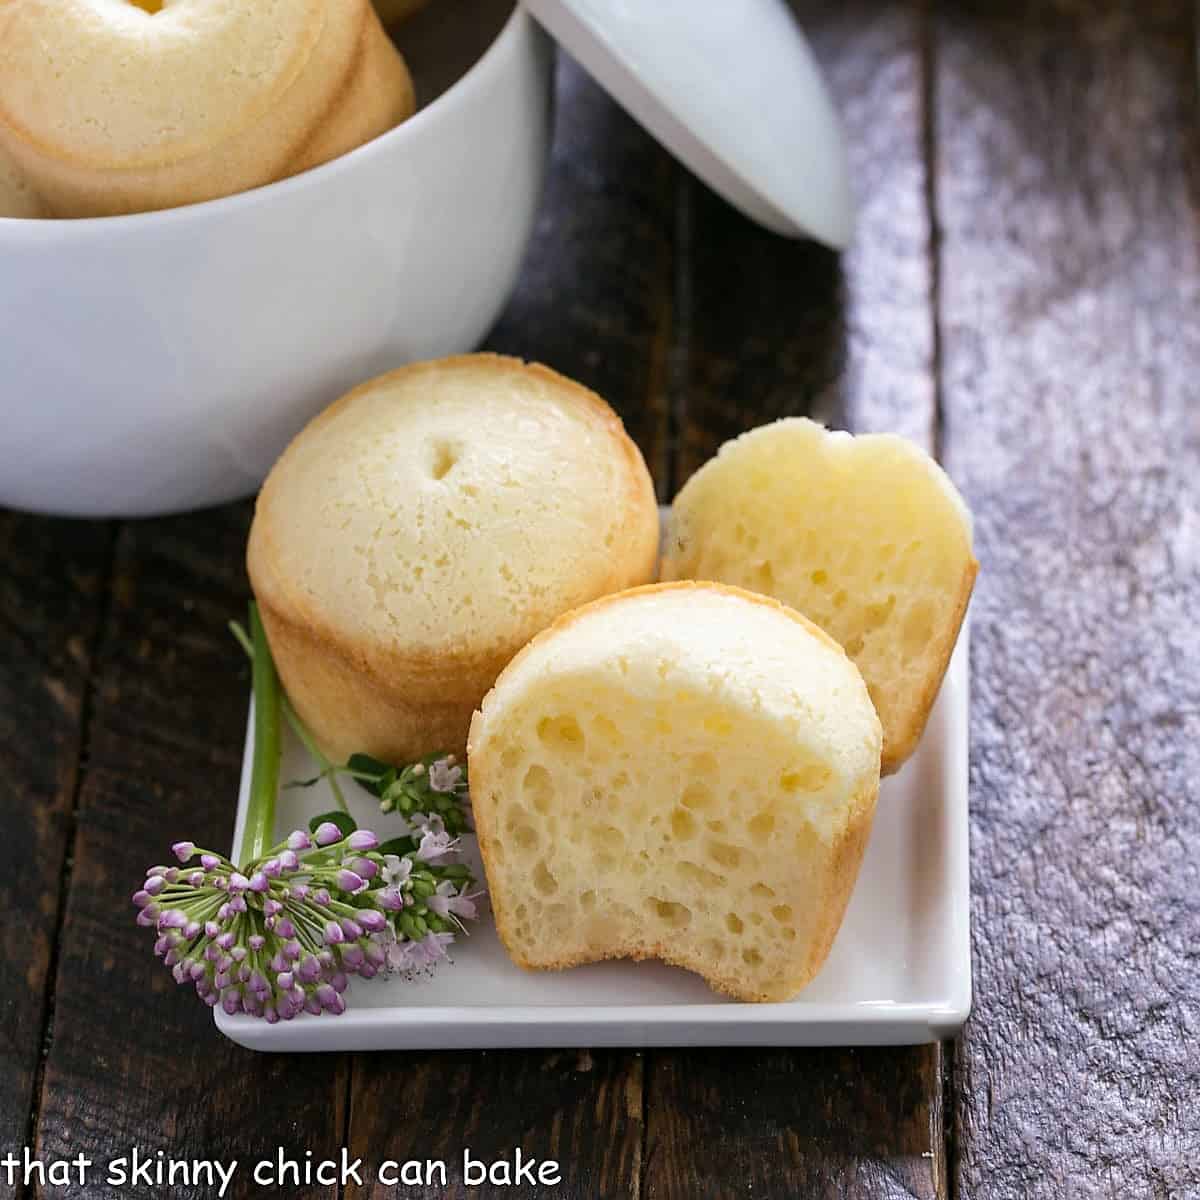 Sliced open Brazilian cheesebread on a white plate with a chive flower garnish.